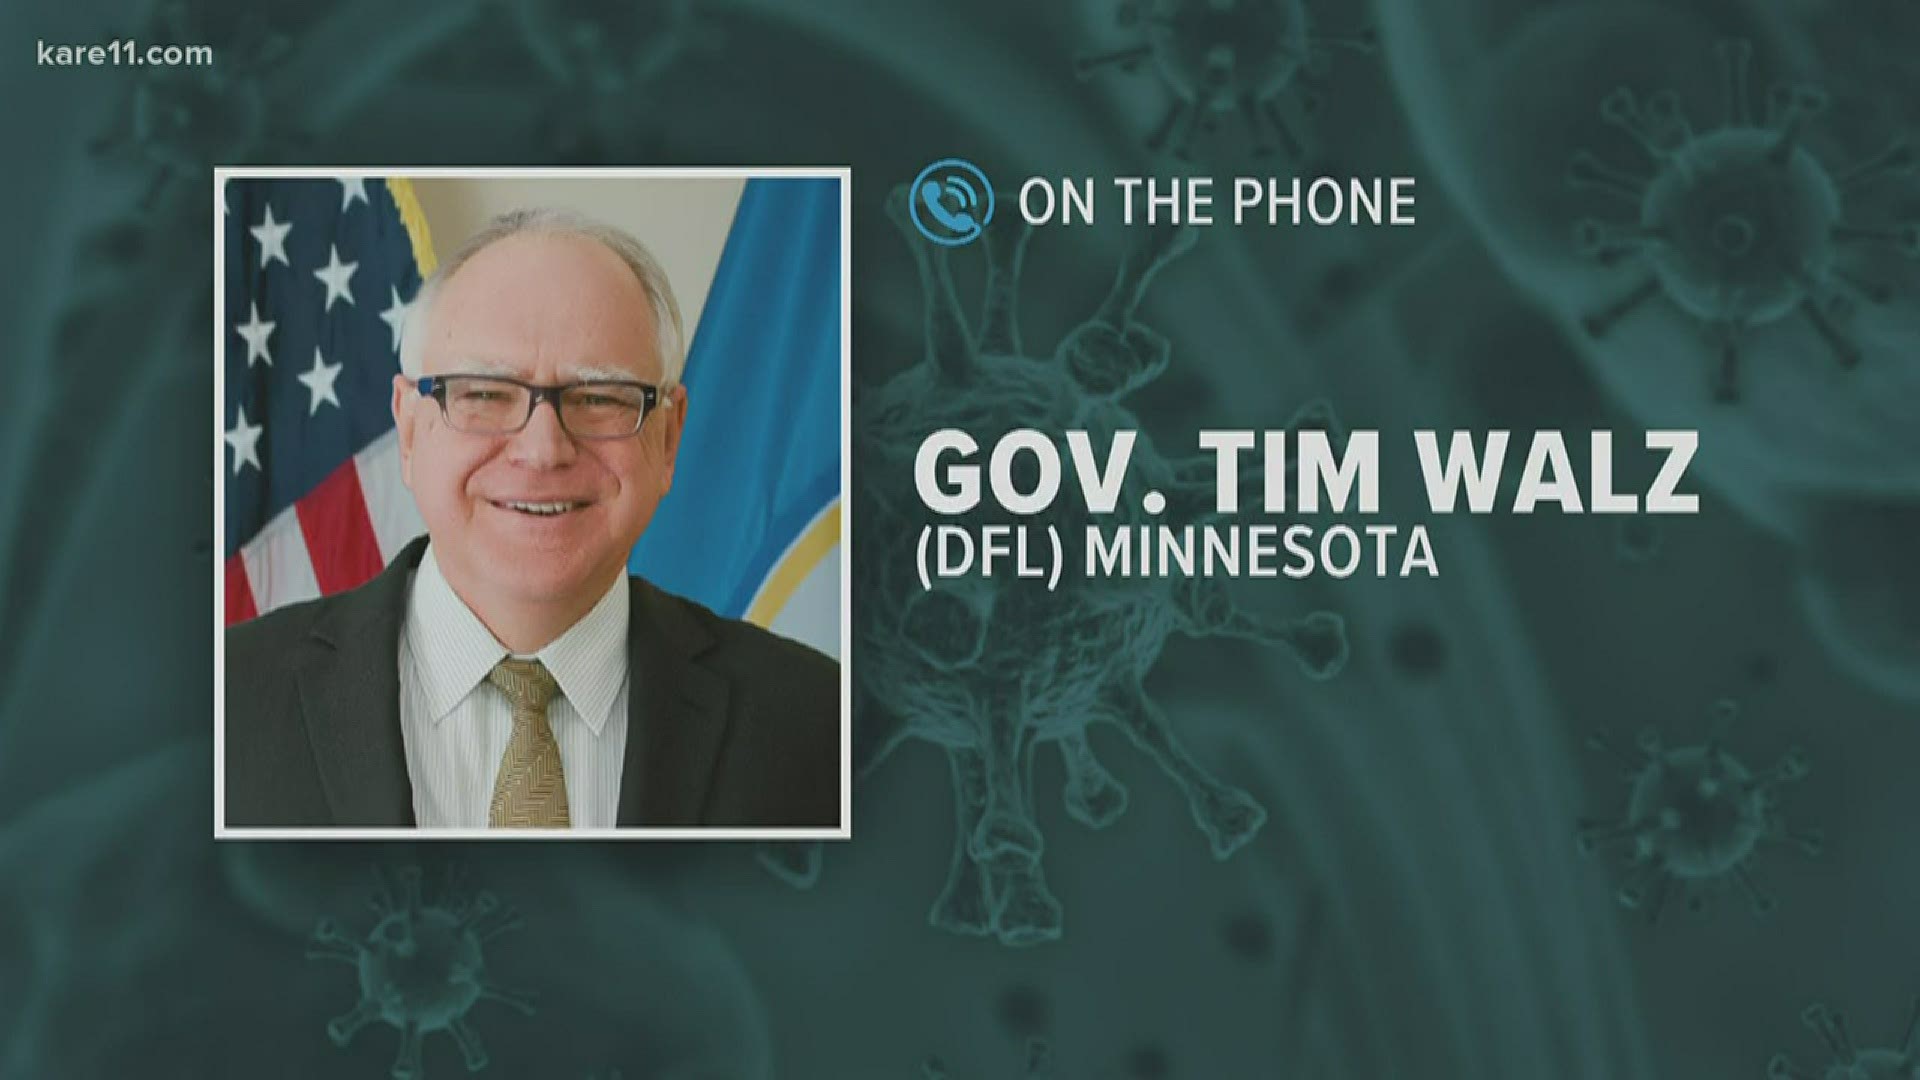 Gov. Tim Walz says wide spread testing is needed to reopen the state.